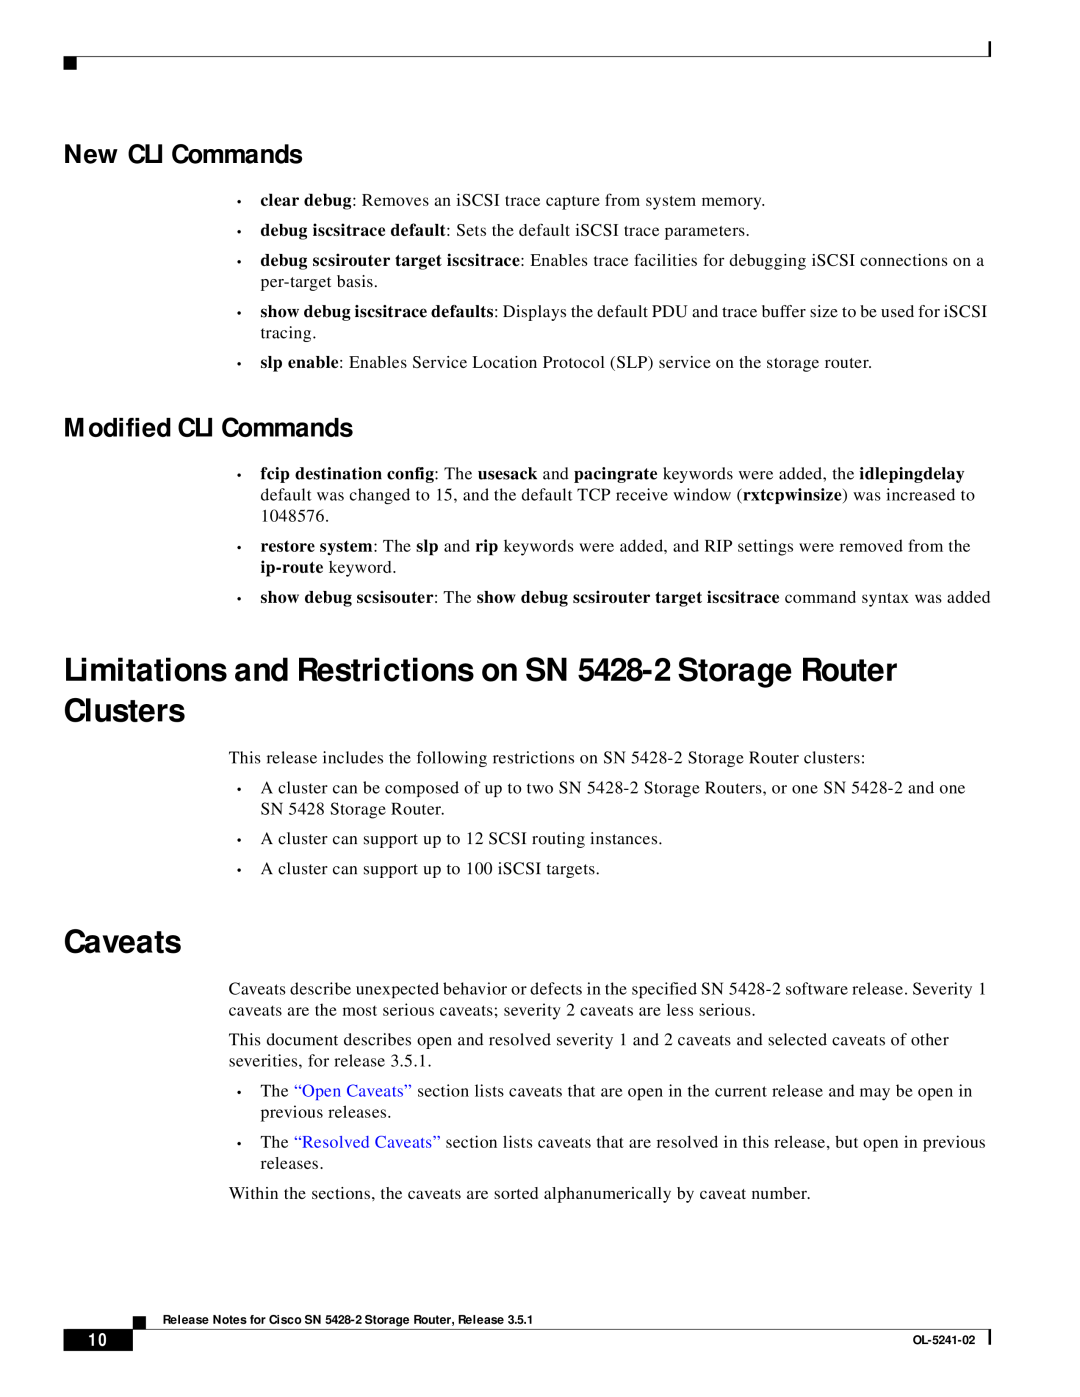 Cisco Systems manual Limitations and Restrictions on SN 5428-2 Storage Router Clusters, Caveats, New CLI Commands 